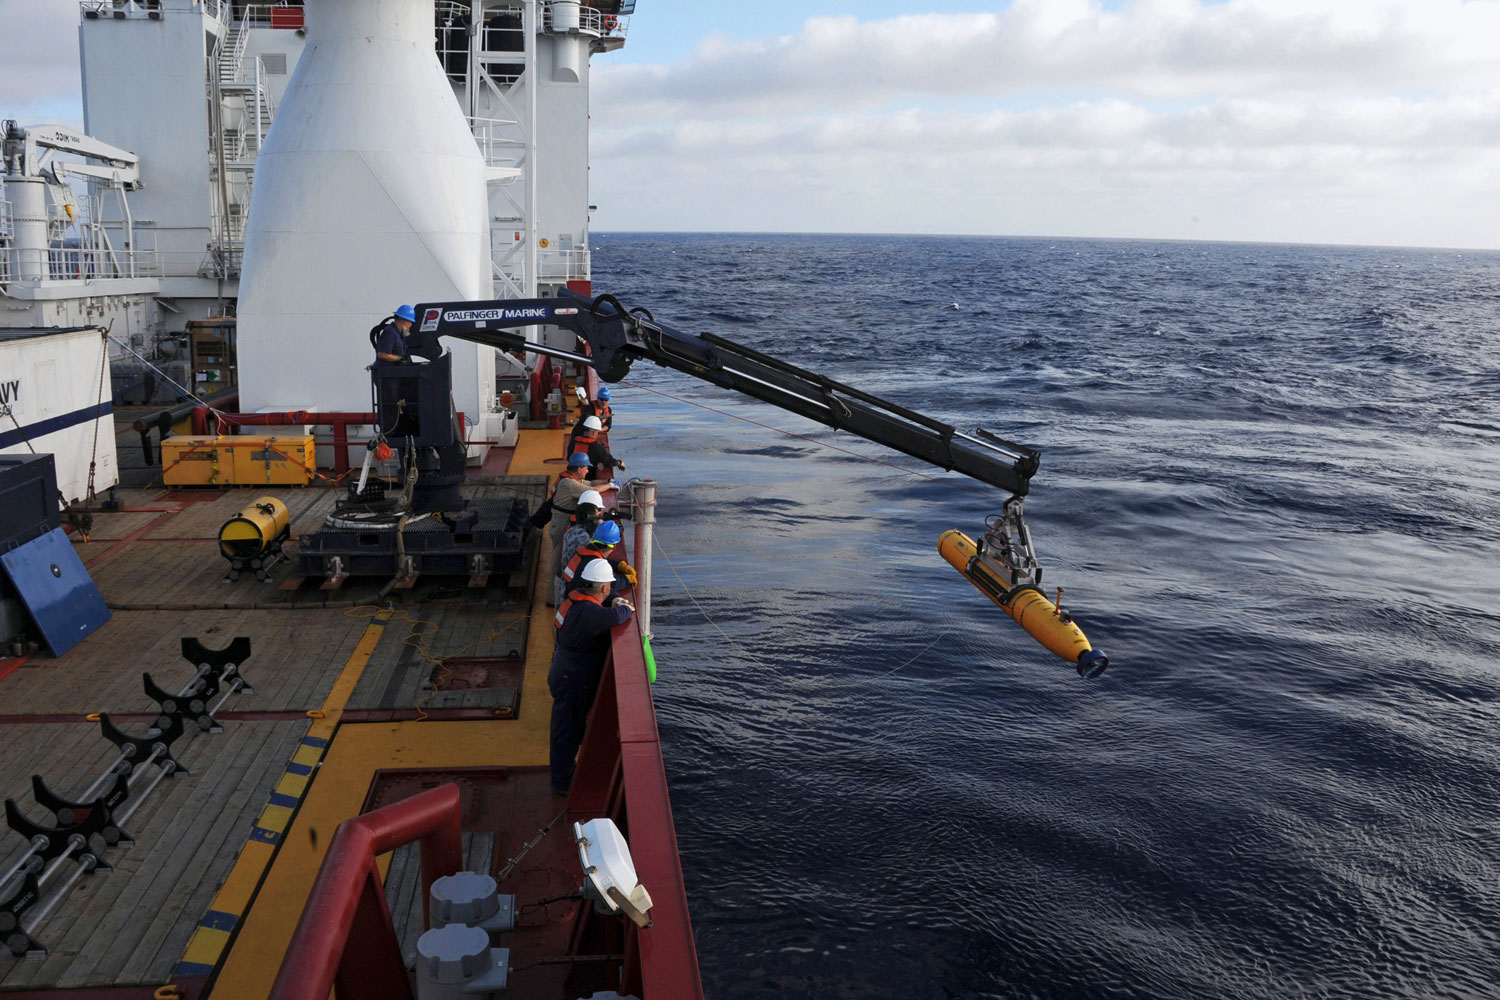 Crew aboard the Australian Defence Vessel Ocean Shield move the U.S. Navy's Bluefin-21 autonomous underwater vehicle into position for deployment in the southern Indian Ocean to look for the missing Malaysia Airlines flight MH 370, April 14, 2014. (U.S. Navy/Reuters)